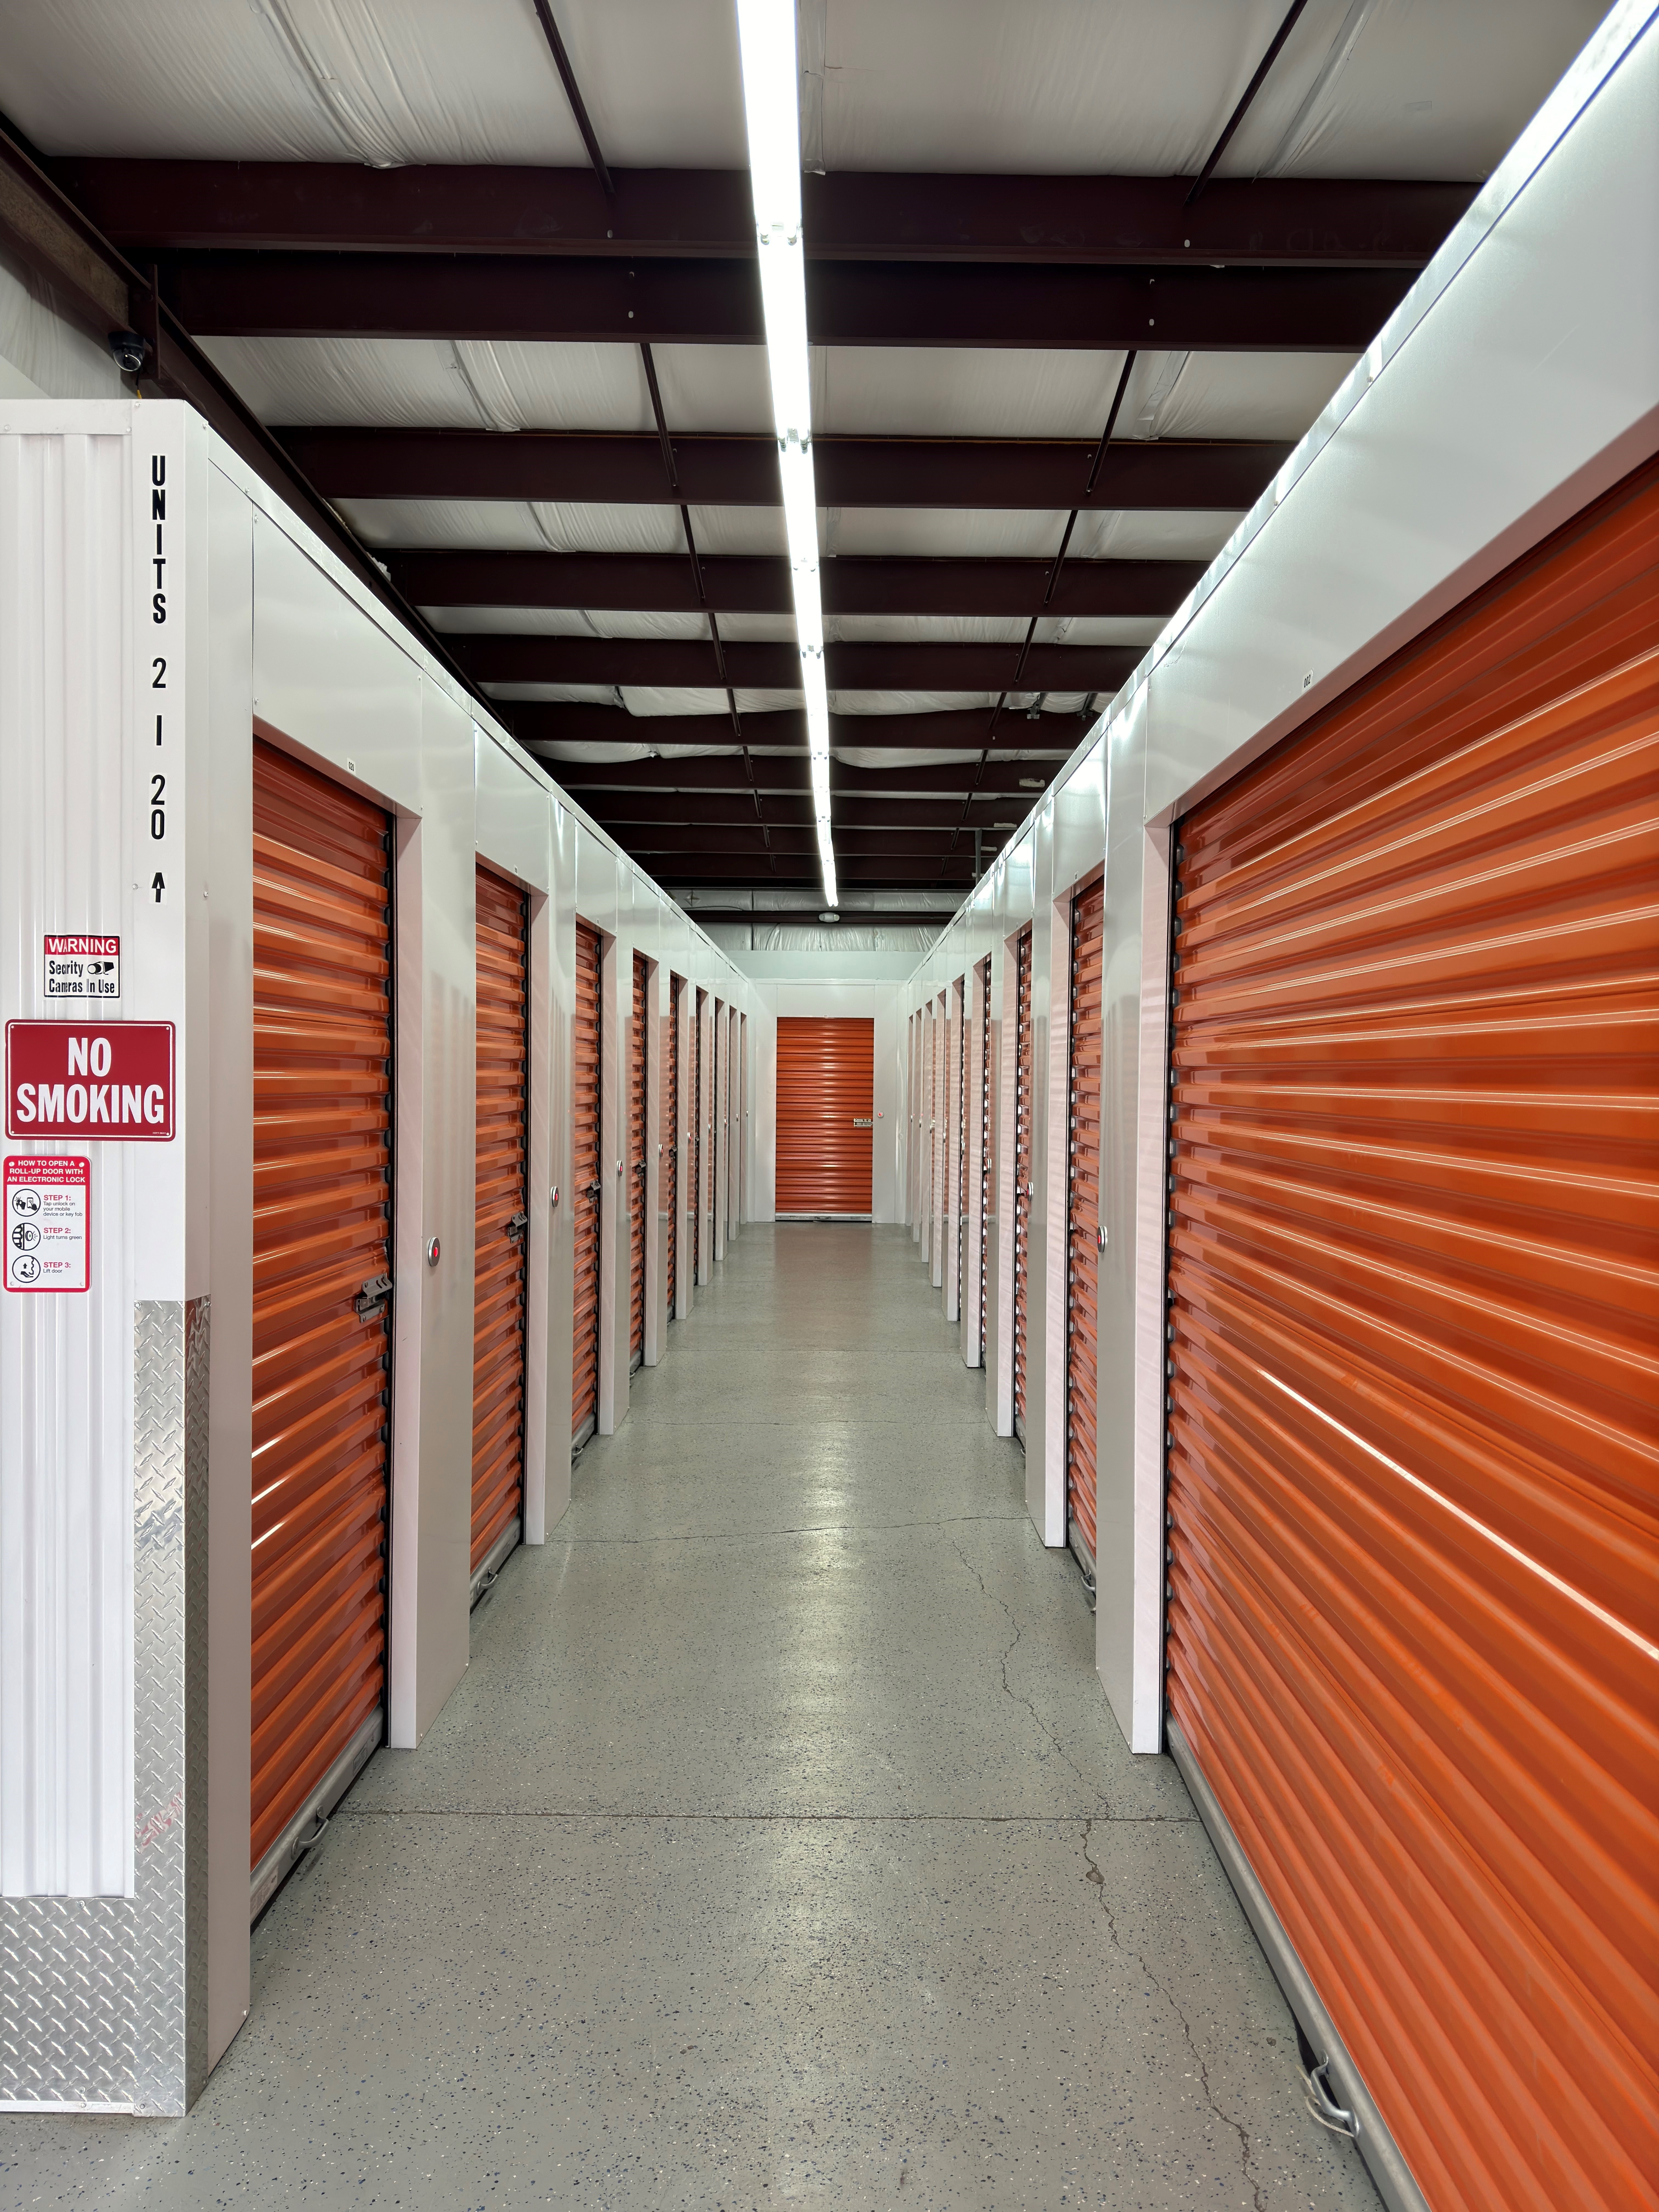 Lock Wise Self Storage - Rosedale Road - Climate-Controlled Units in Silver City, NM